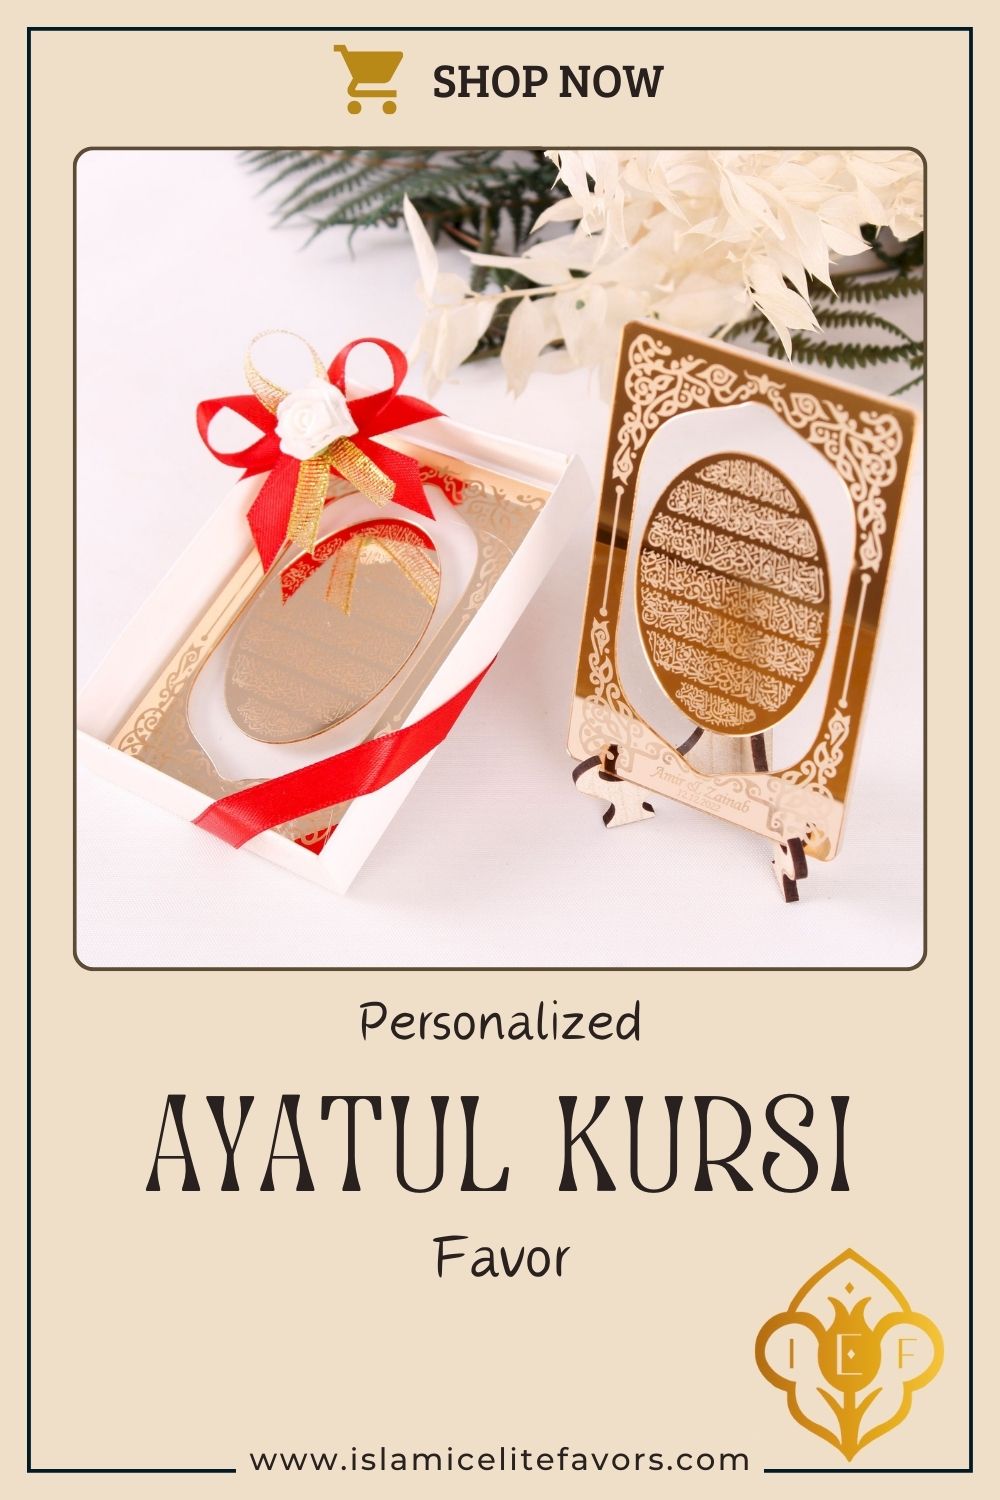 Personalized Wedding Favor Ayatul Kursi on Stand Gold Clear Mirrors - Islamic Elite Favors is a handmade gift shop offering a wide variety of unique and personalized gifts for all occasions. Whether you're looking for the perfect Ramadan, Eid, Hajj, wedding gift or something special for a birthday, baby shower or anniversary, we have something for everyone. High quality, made with love.